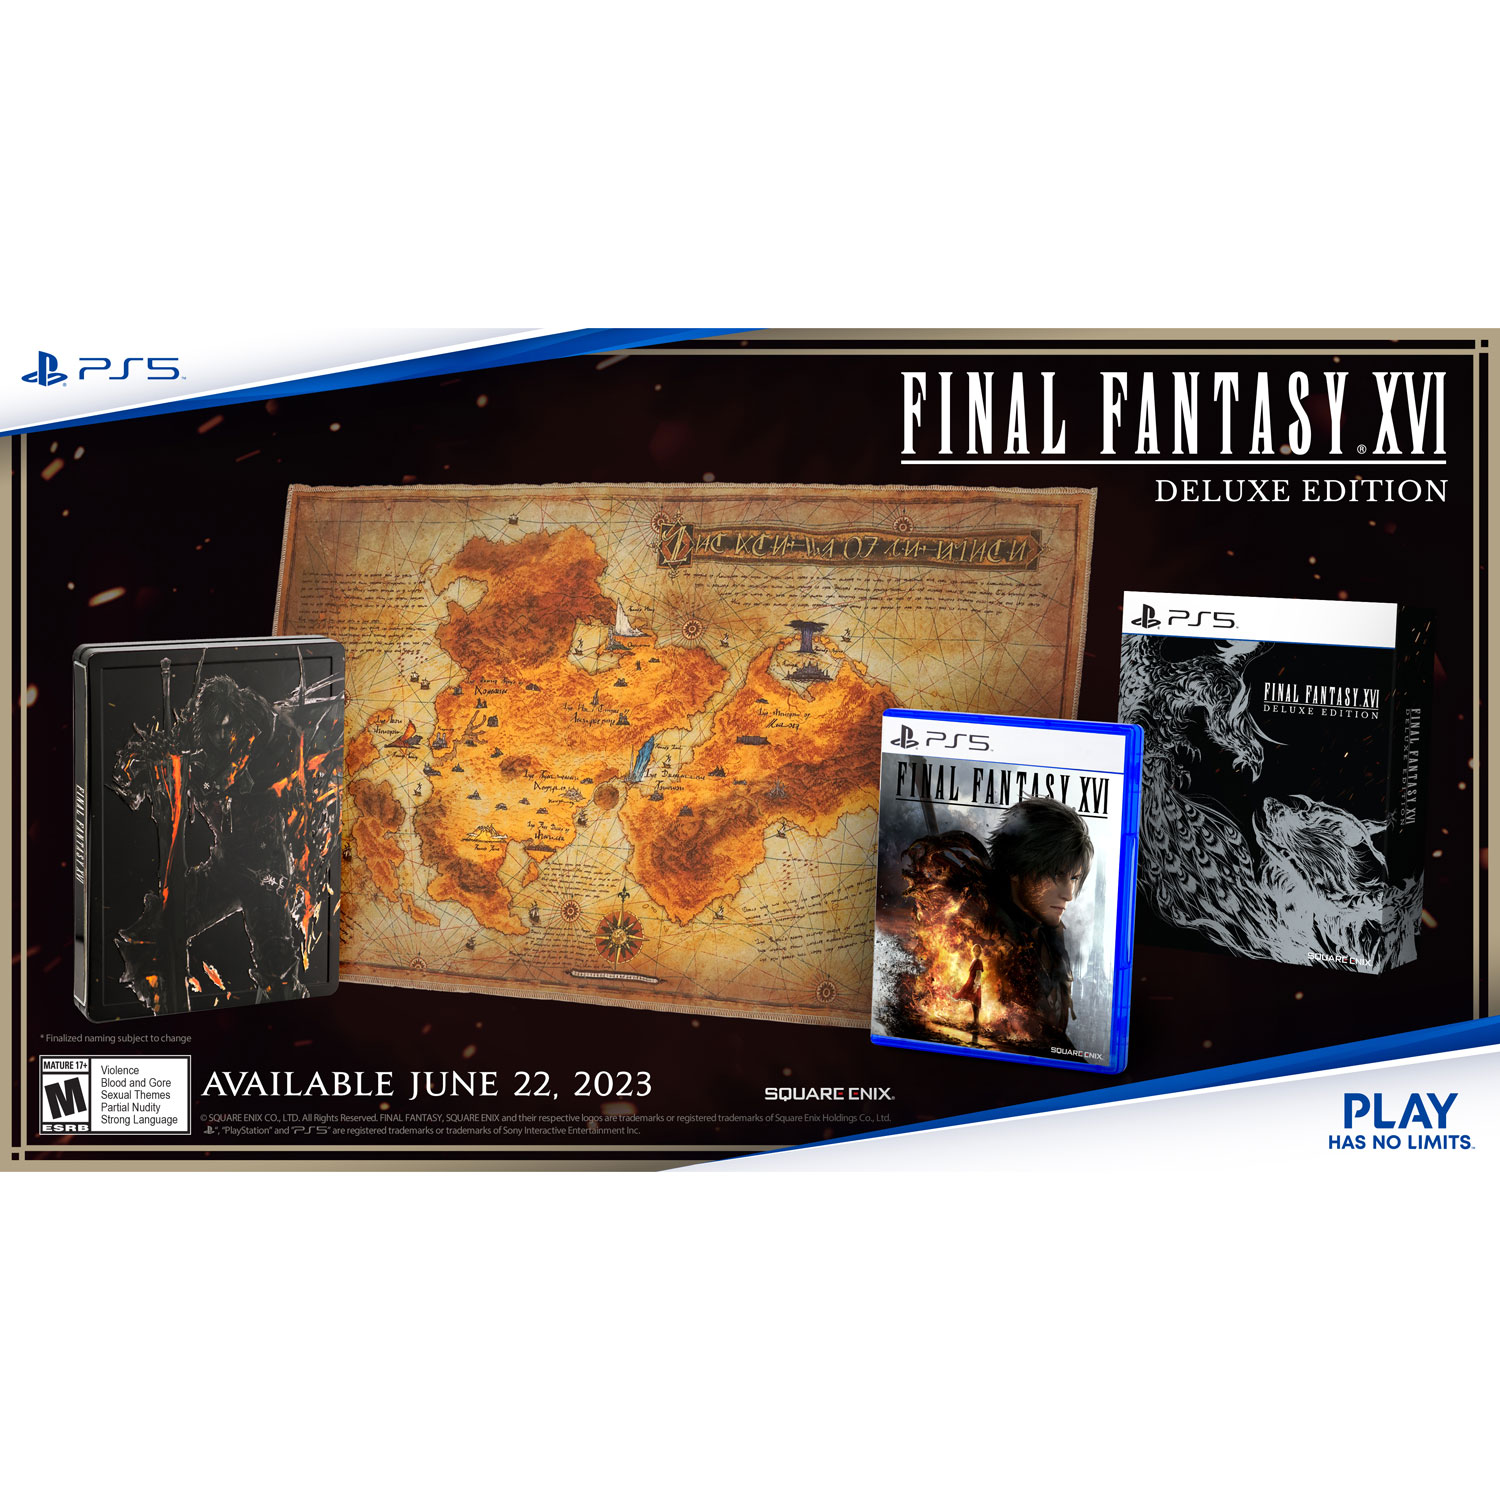 Final Fantasy XVI Deluxe Edition with SteelBook (PS5)